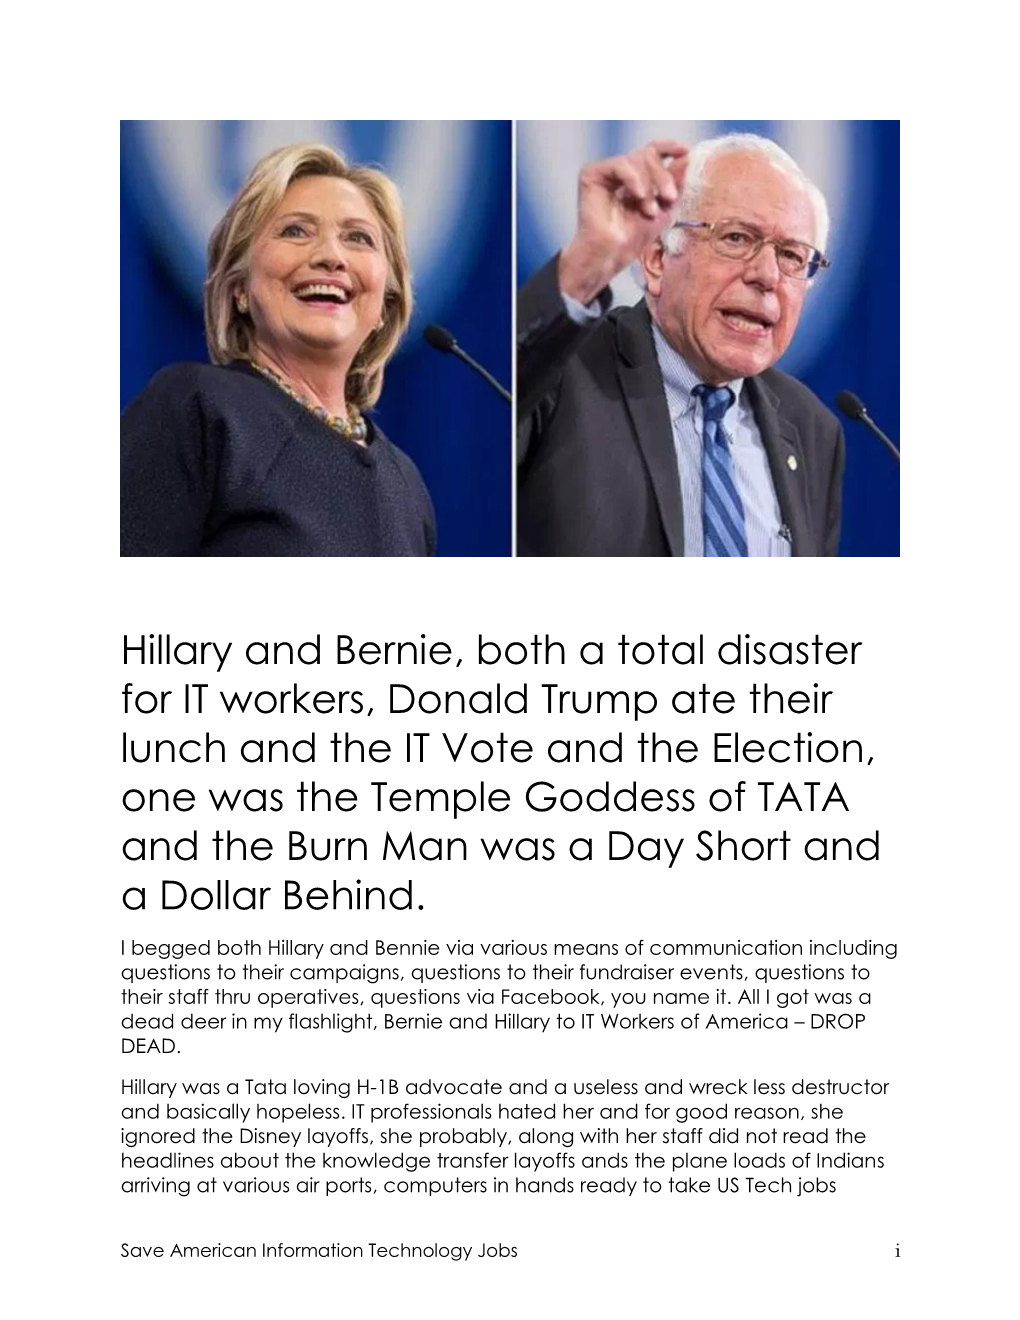 Hillary and Bernie, Both a Total Disaster for IT Workers, Donald